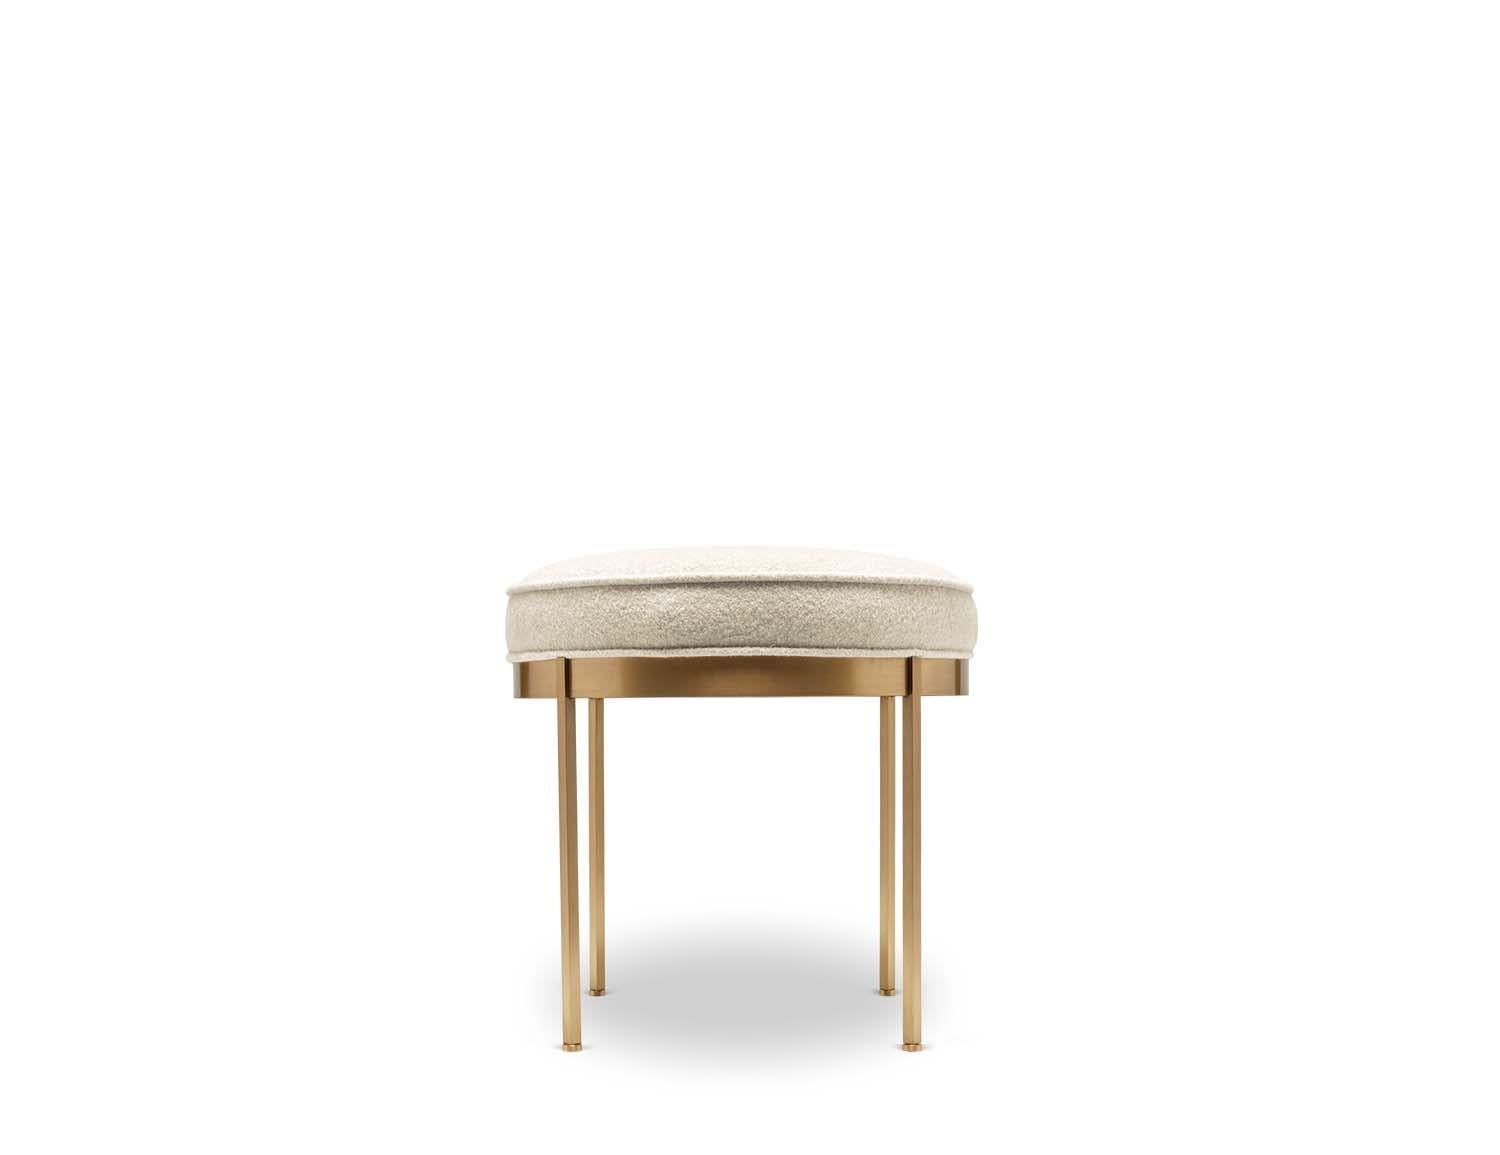 The Petite Paul ottoman features a round solid lacquered brass base and an upholstered seat with piping. Each leg features a rounded leveler. 

The Lawson-Fenning Collection is designed and handmade in Los Angeles, California. Reach out to